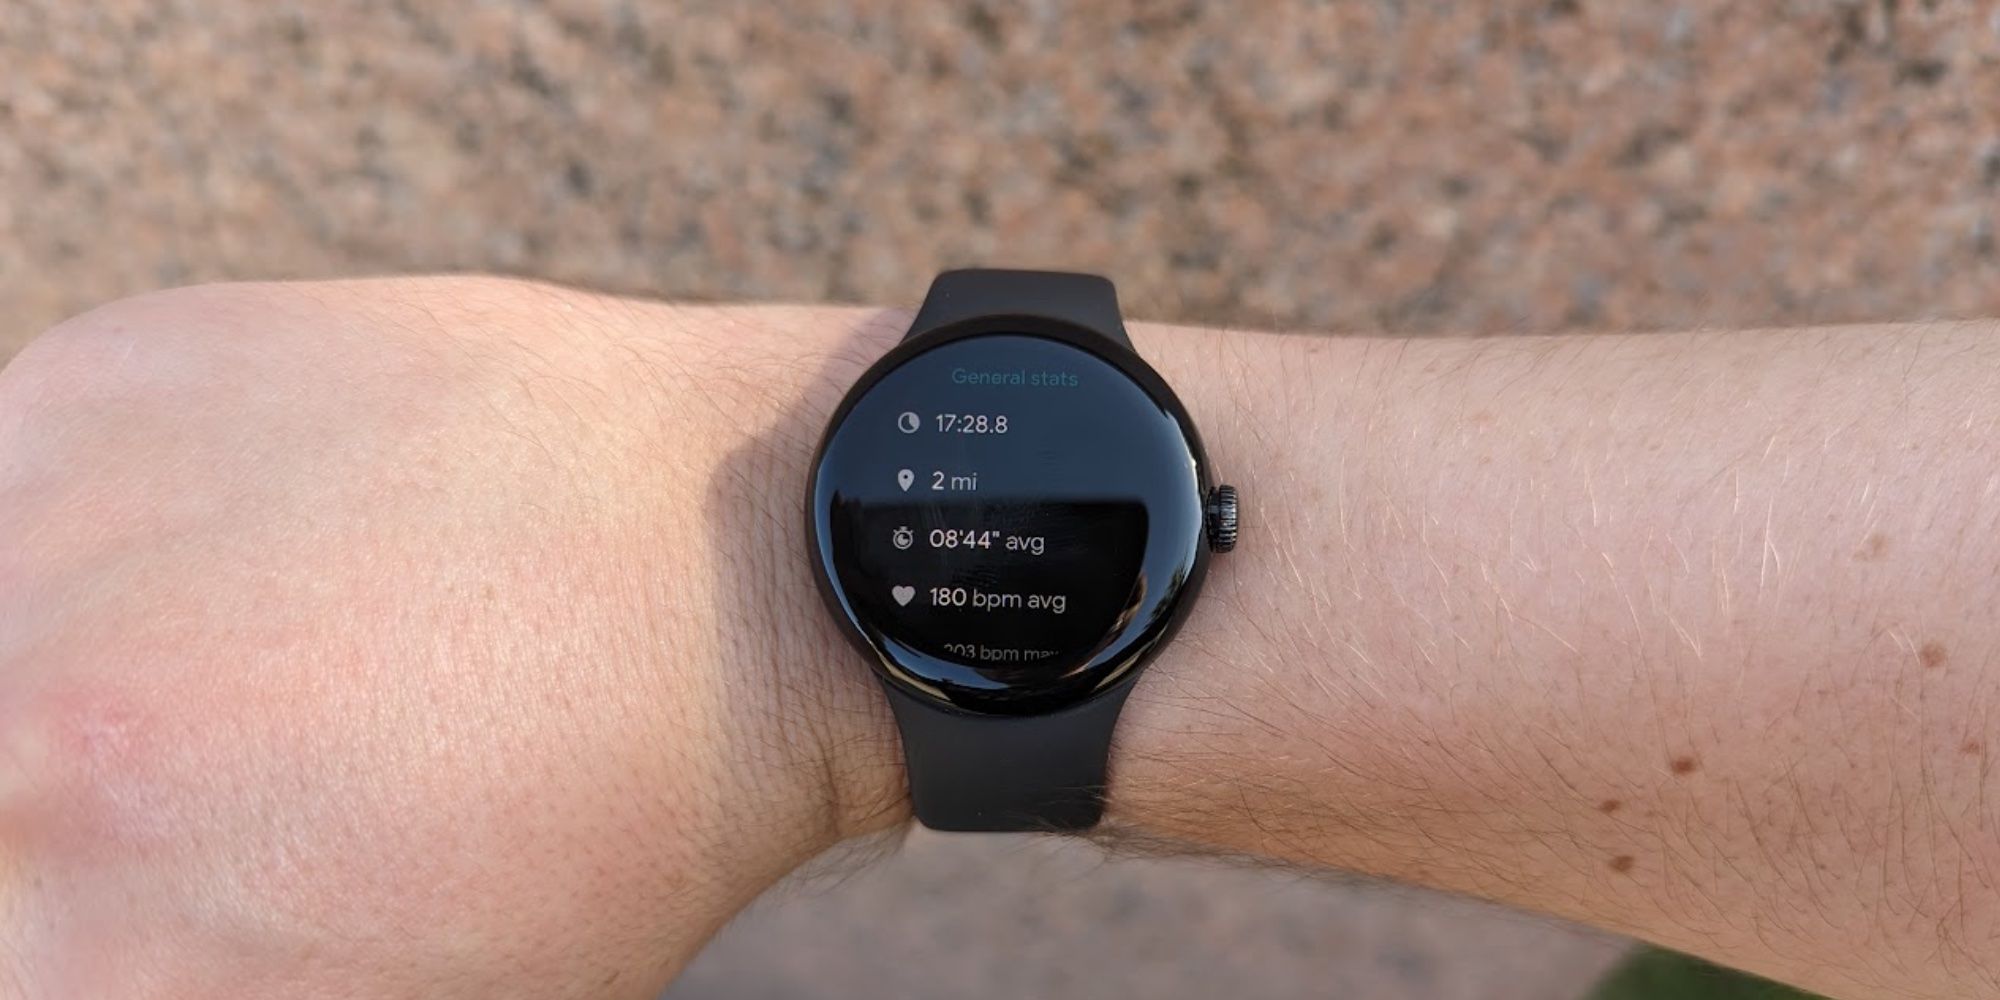 Running Stats screen on the Pixel Watch.